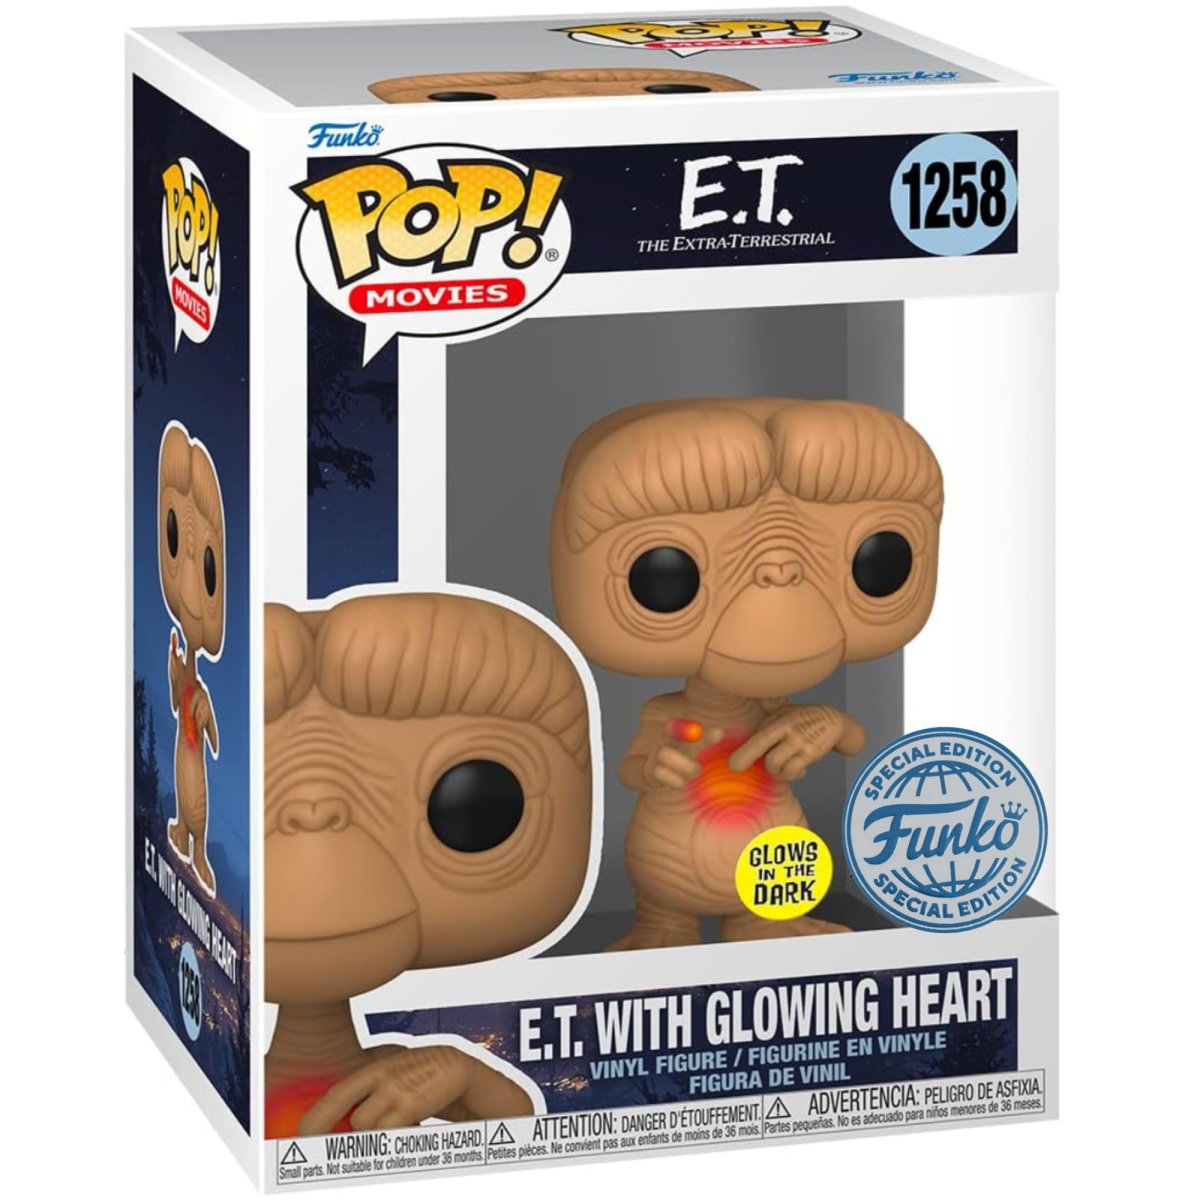 E.T. The Extraterrestrial - E.T. with Glowing Heart (GITD Special Edition) #1258 - Funko Pop! Vinyl Movies - Persona Toys